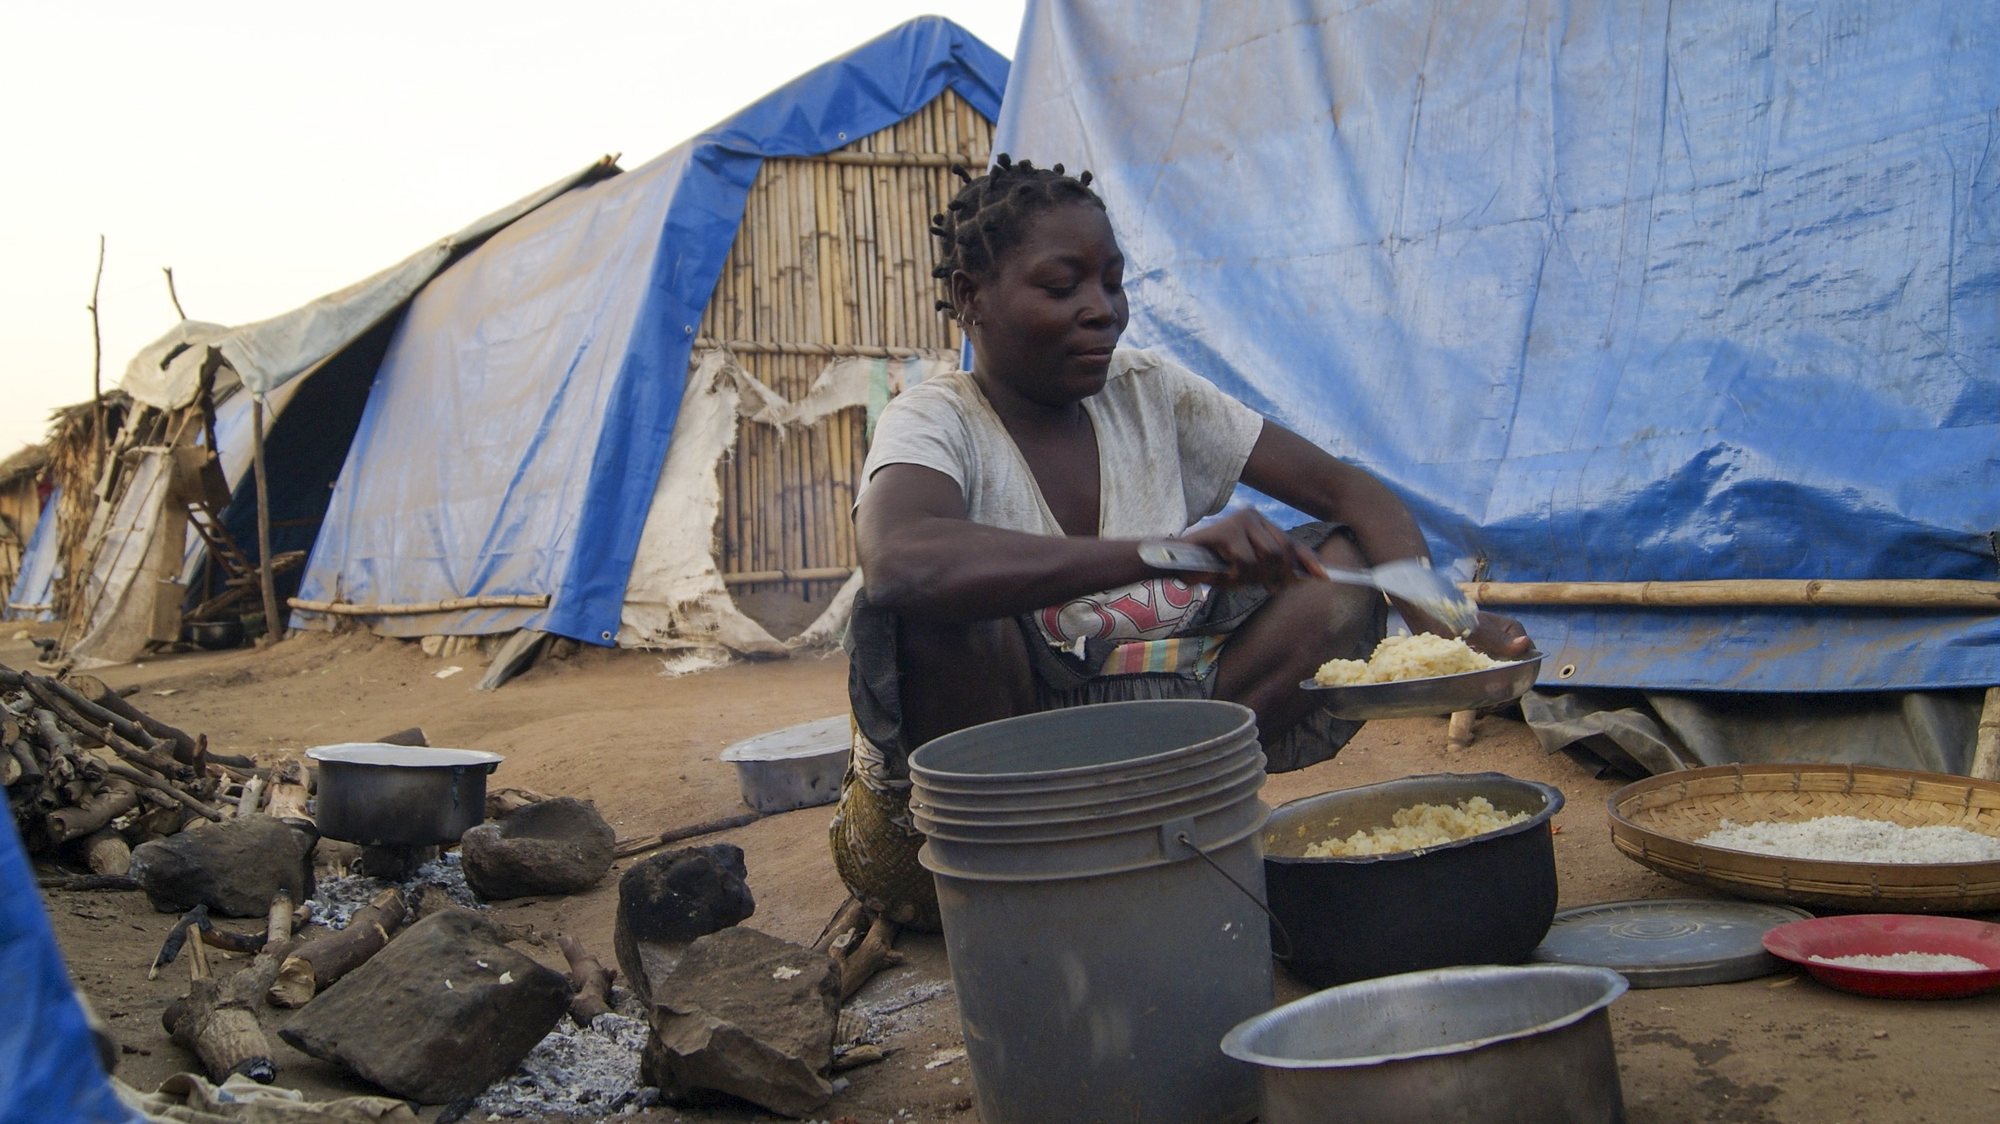 A woman prepares a meal in one of the shelter camps in Metuge, a space housing displaced people fleeing armed violence in northern Mozambique. Cabo Delgado, Mozambique, 16 August 2021 (issue on 17 August 2021). Following the attacks, which have terrorized Cabo Delgado province since 2017, there are more than 3,100 deaths, according to the ACLED conflict registration project, and more than 817,000 displaced people, according to Mozambican authorities. LUISA NHANTUMBO/LUSA